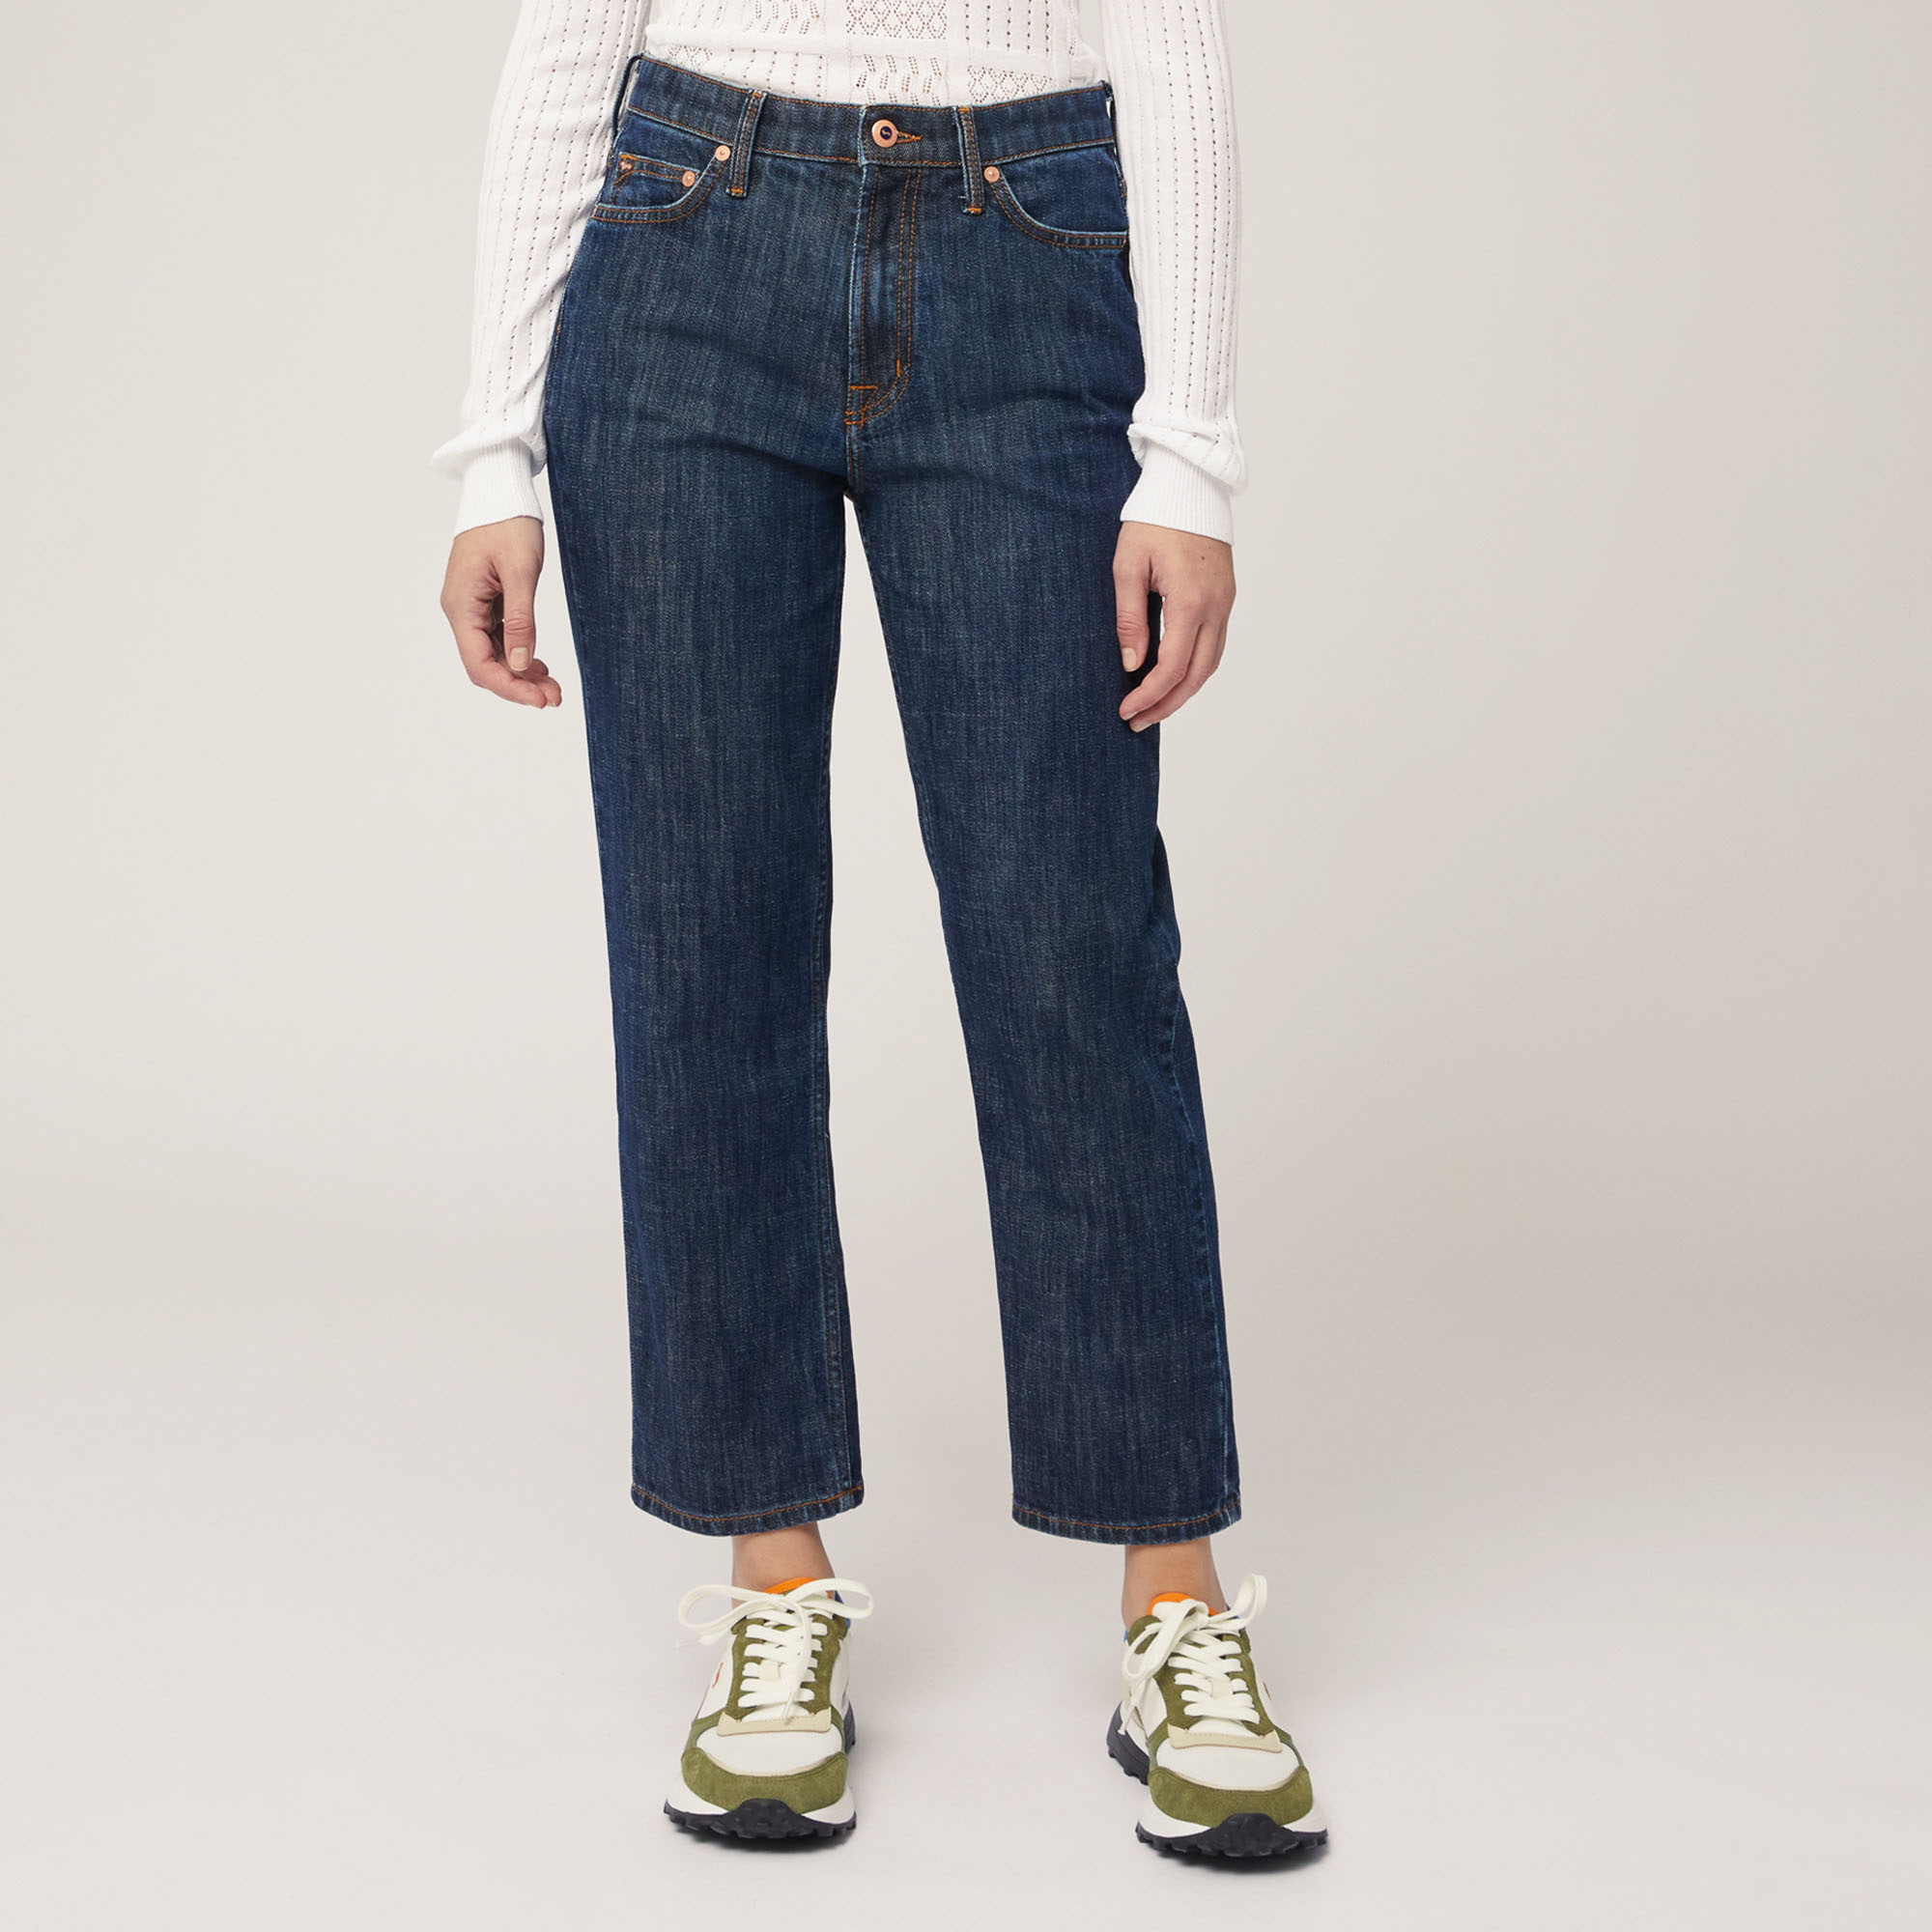 Denim Trousers with Striped Label, Blue, large